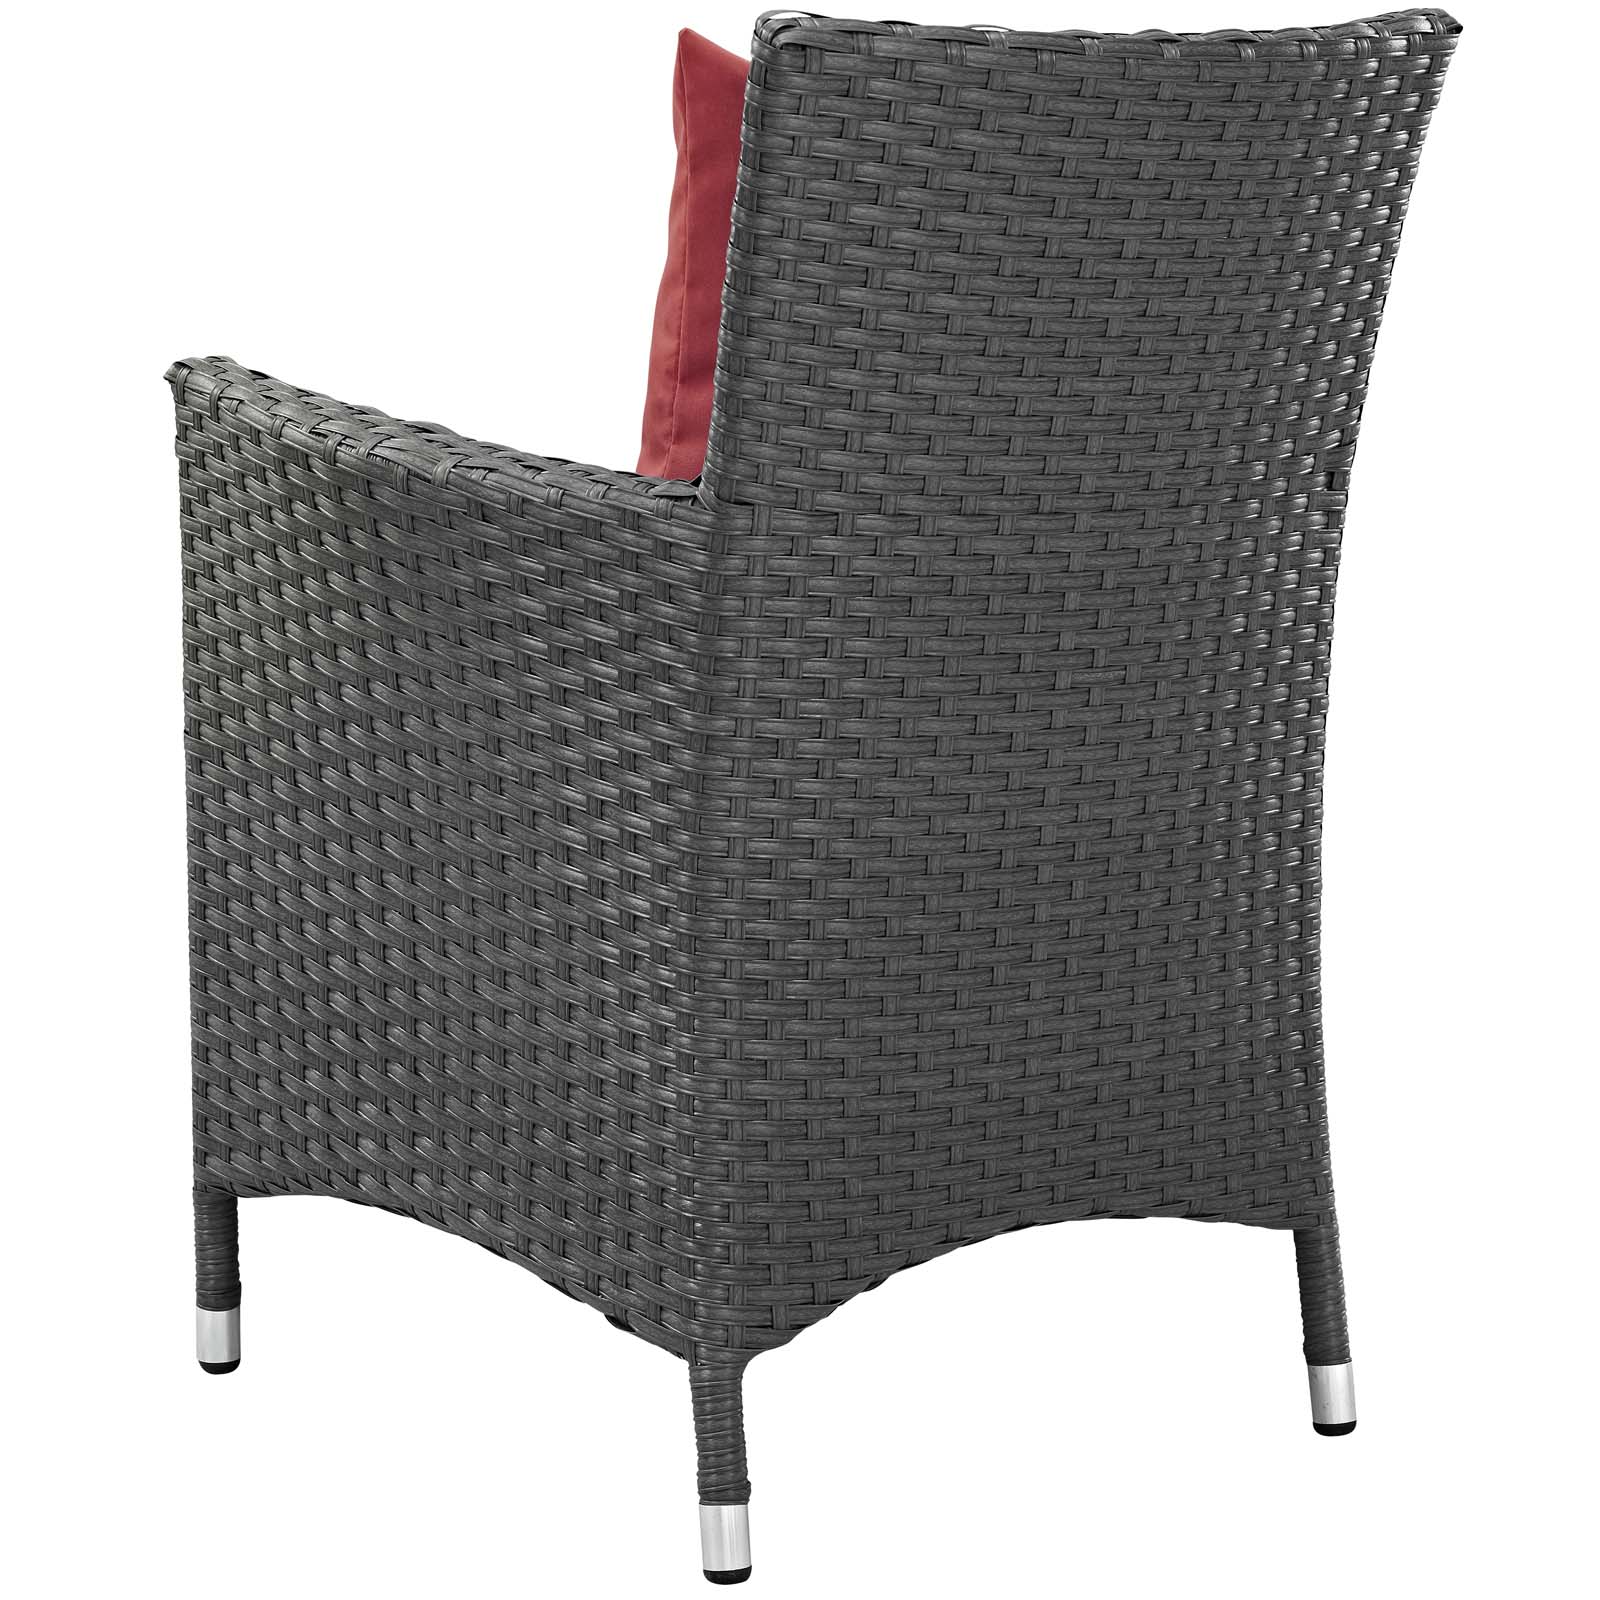 Modern Contemporary Urban Design Outdoor Patio Balcony Garden Furniture Side Dining Chair and Table Set, Sunbrella Rattan Wicker, Red - image 5 of 6